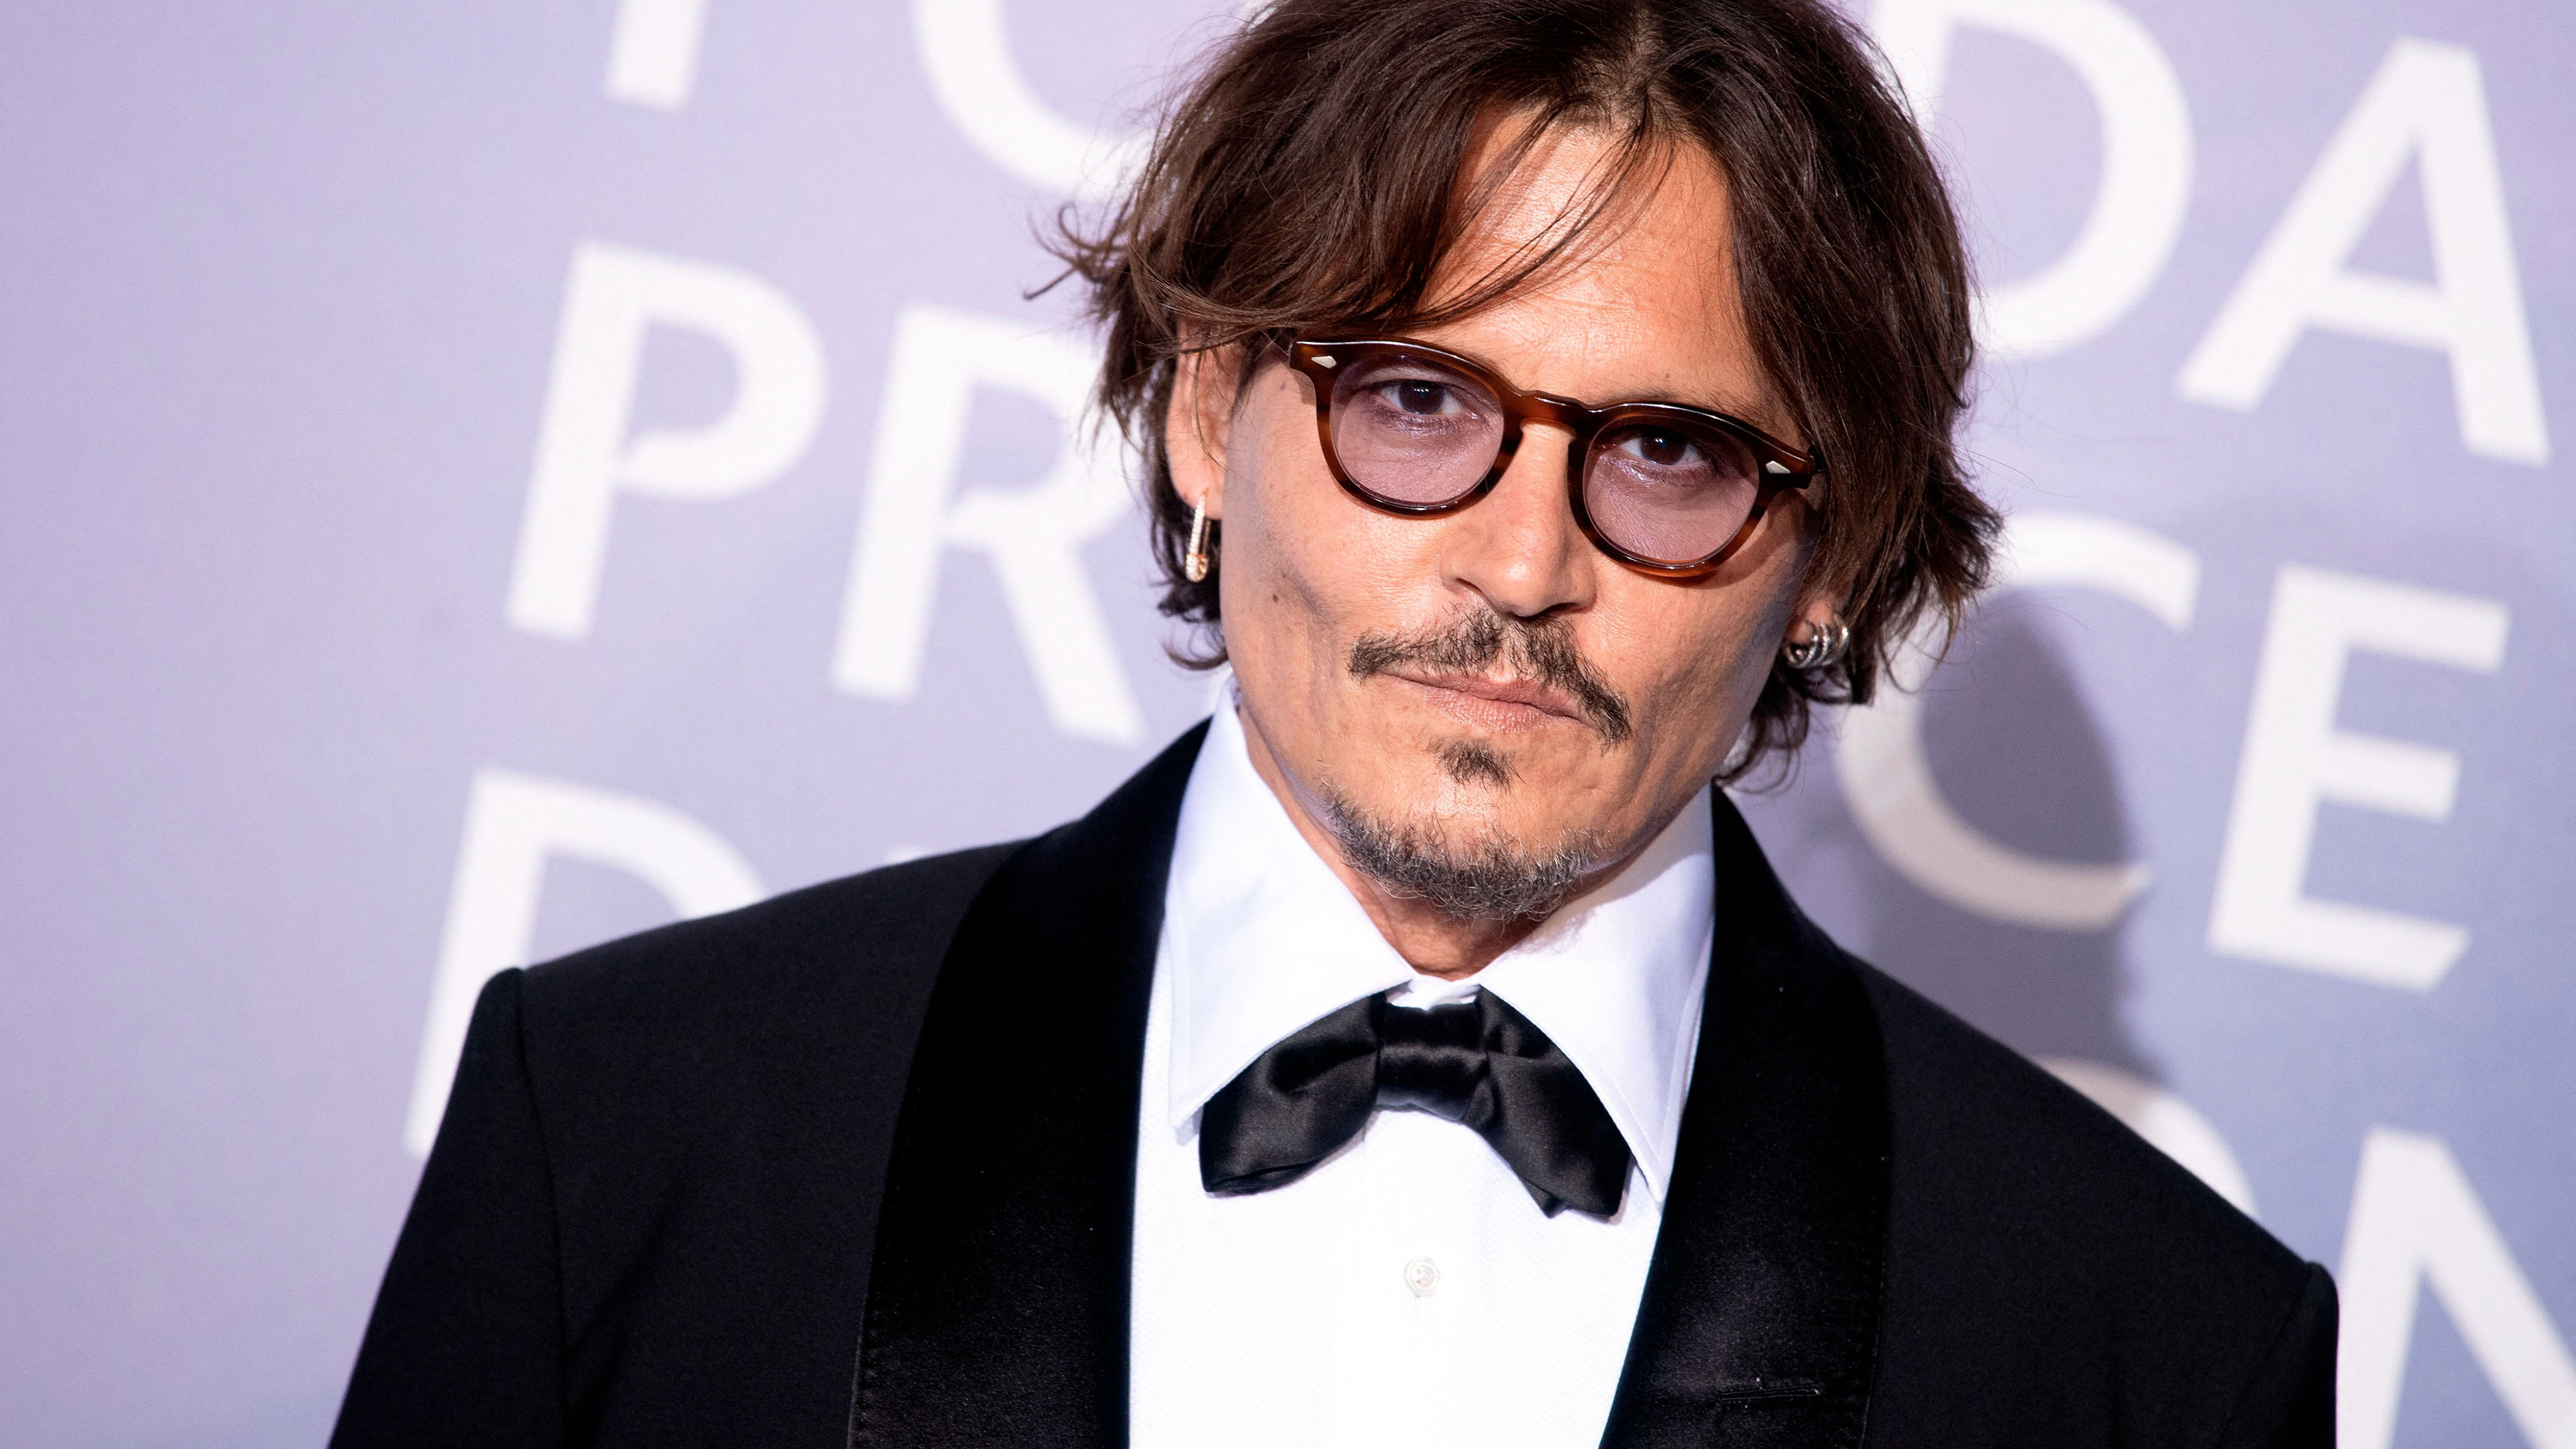 John Christopher Depp II (born June 9, 1963) is an American actor, producer, and musician. He has been nominated for ten Golden Globe Awards...